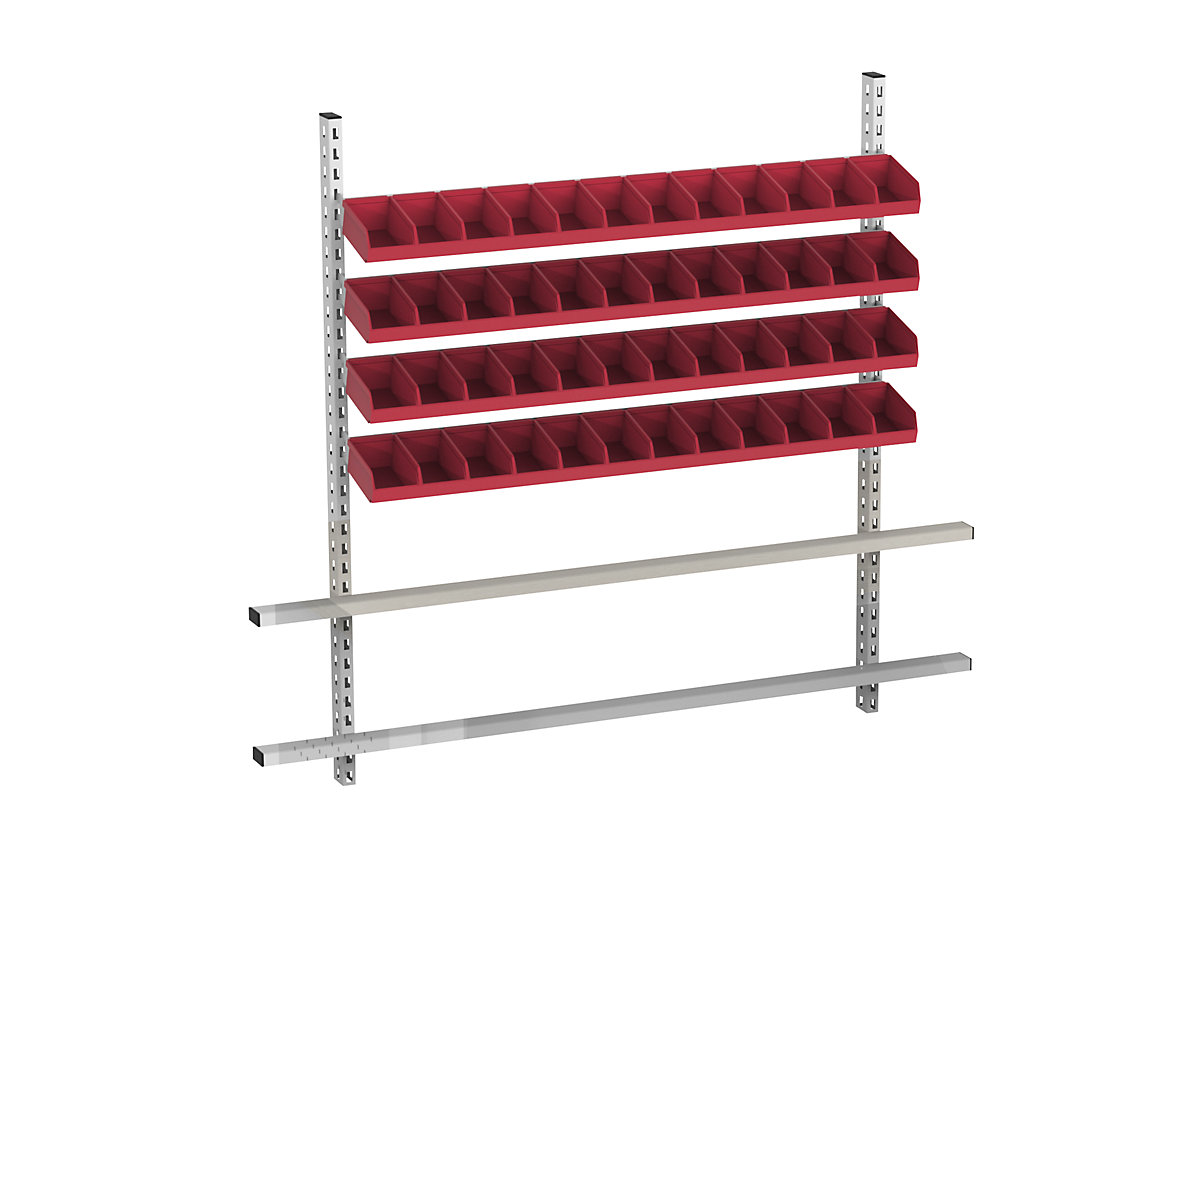 Add-on for table with open fronted storage bins (Product illustration 2)-1